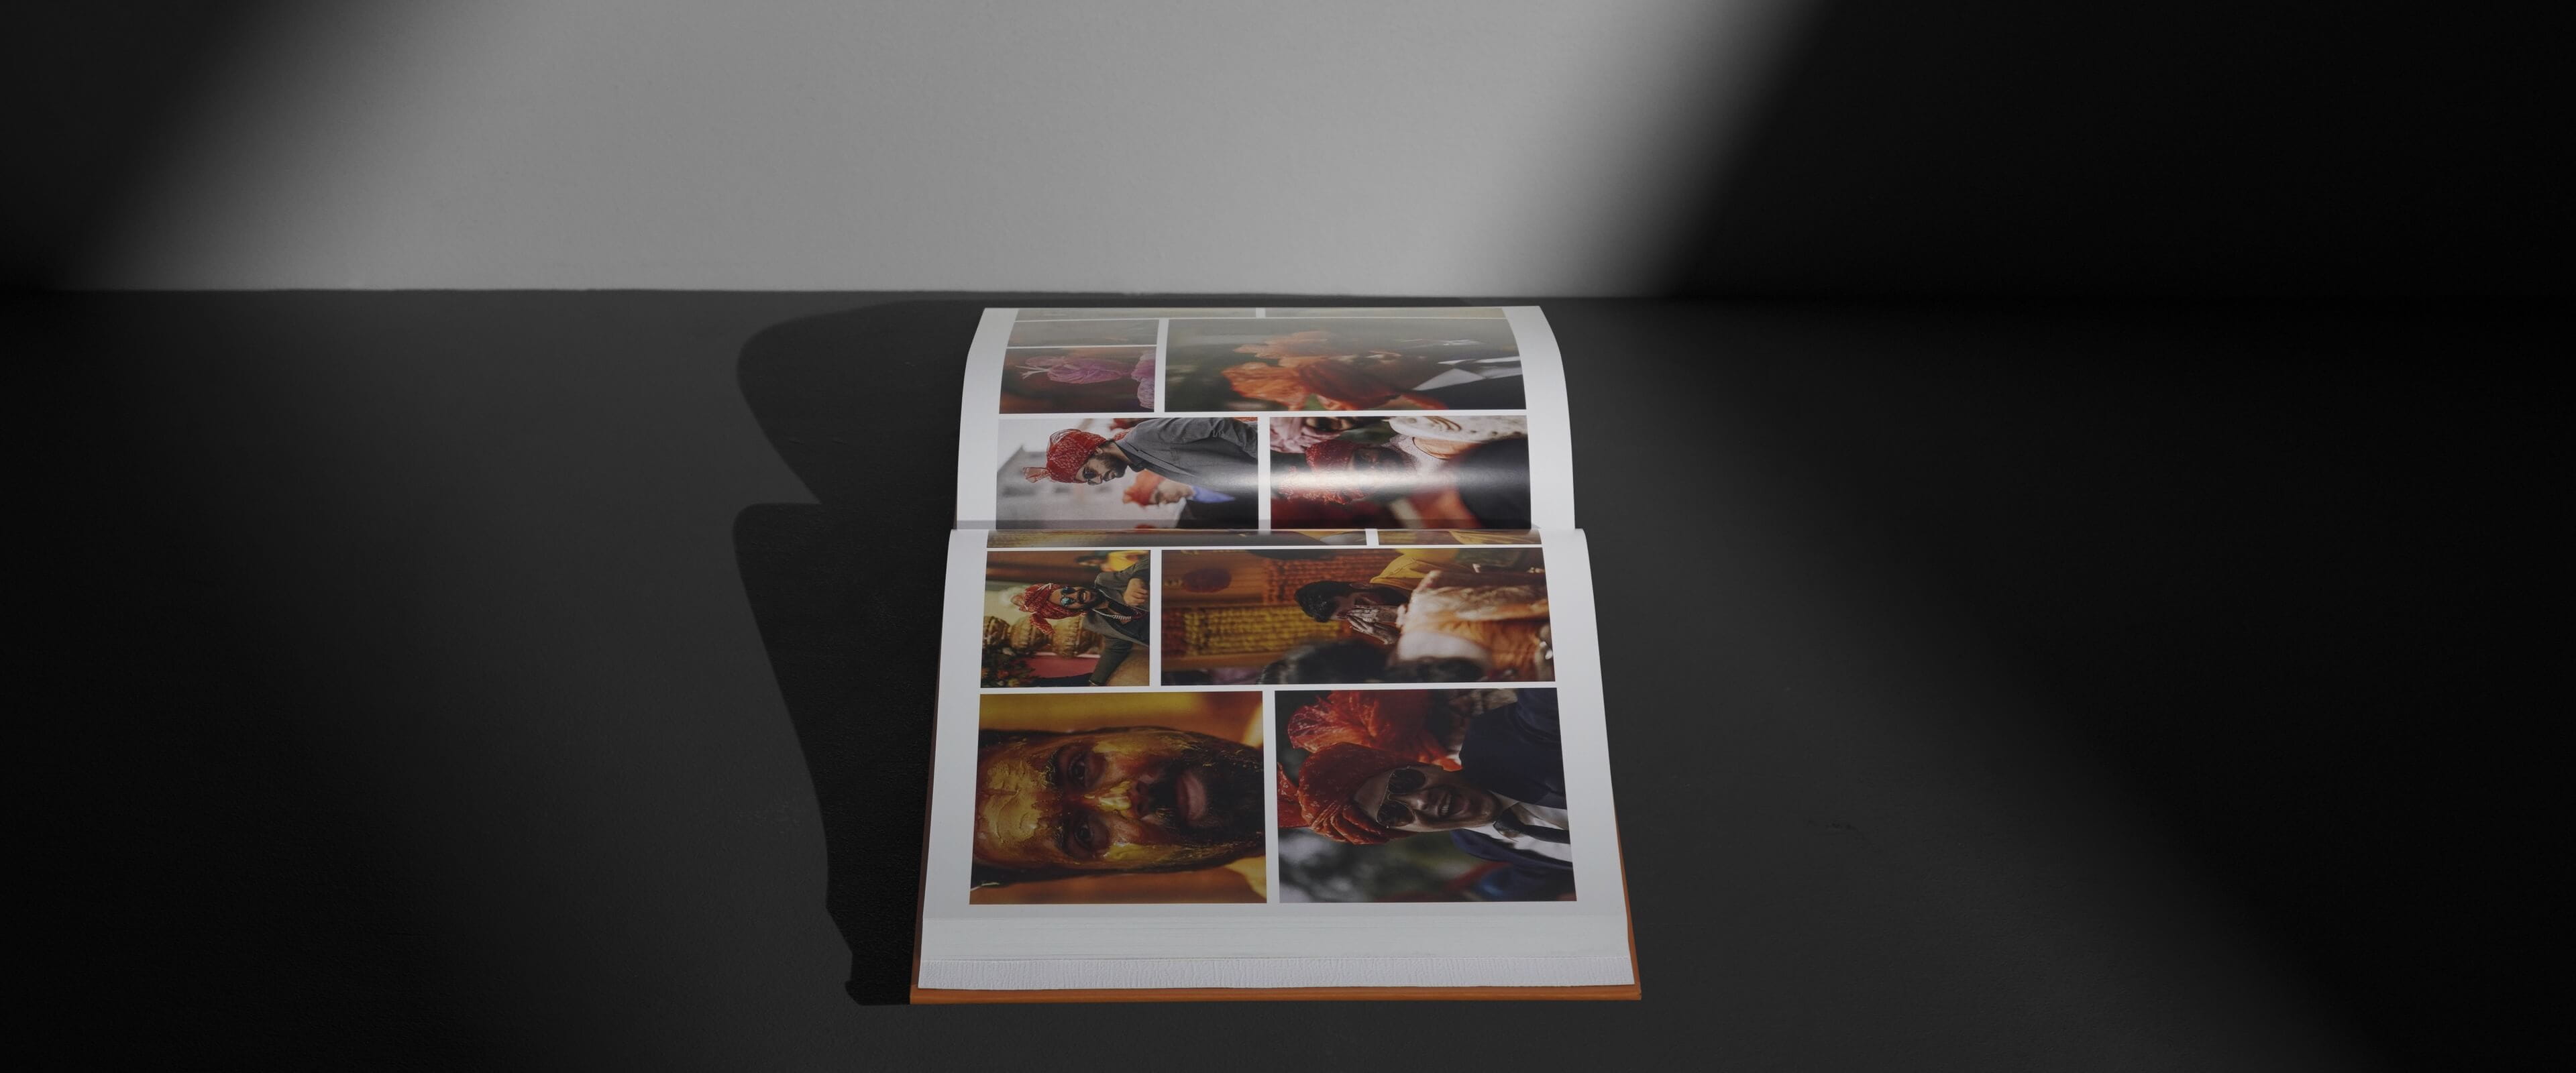 press printing photo book with photos of sikh wedding